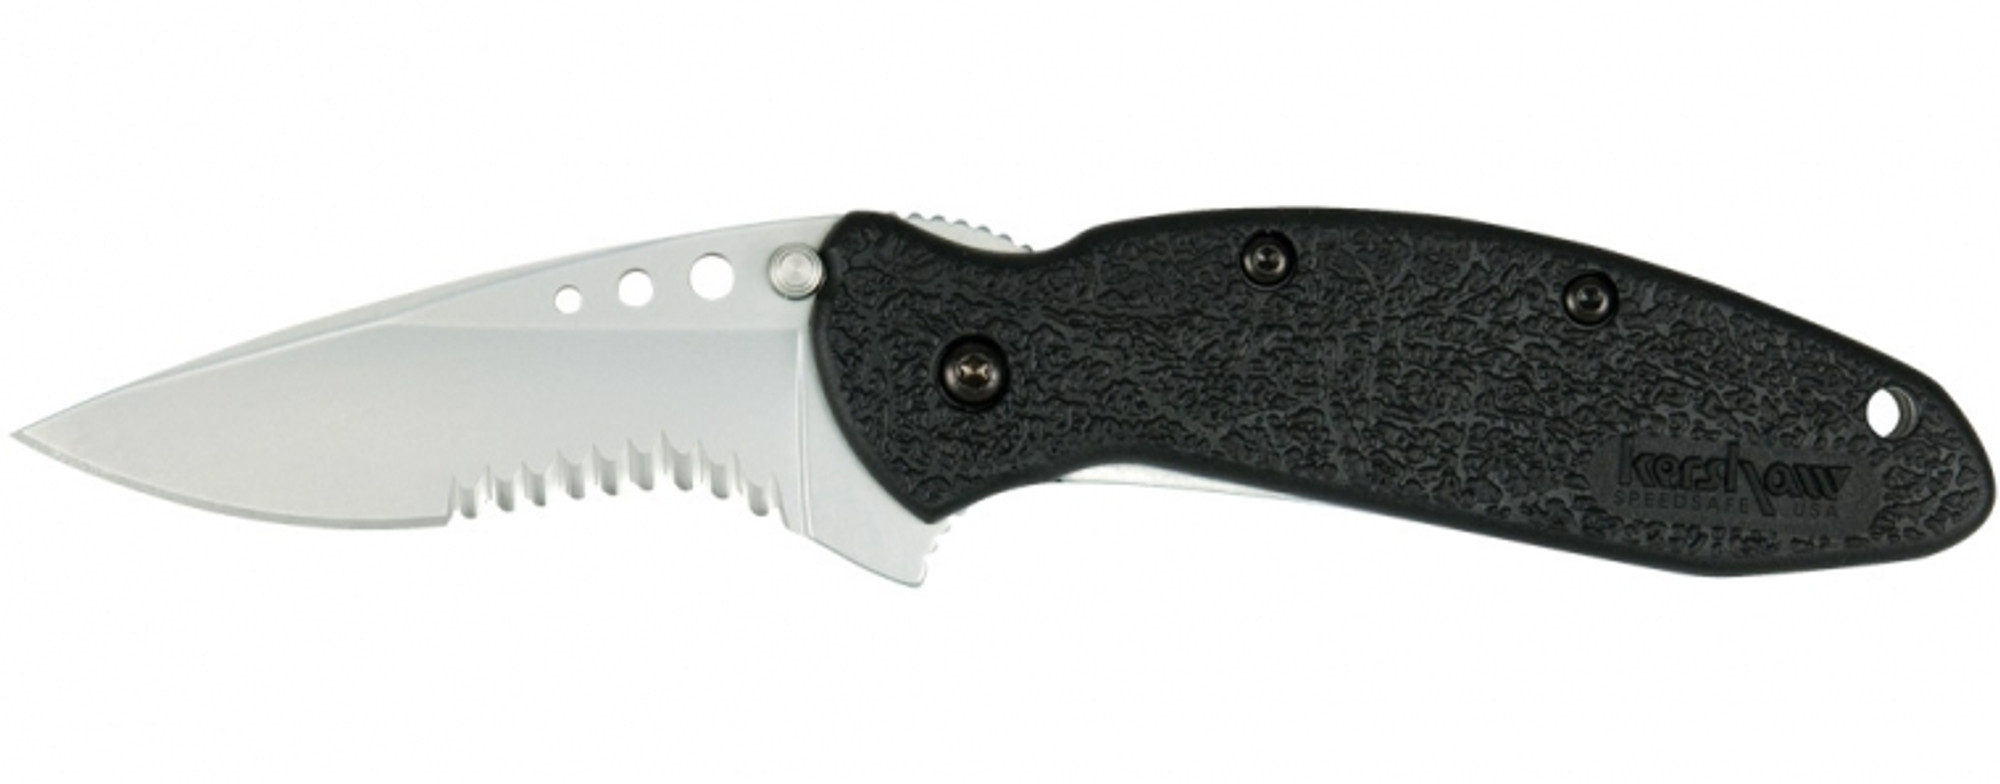 Kershaw 1620ST Scallion Black Partially Serrated Assisted Openin